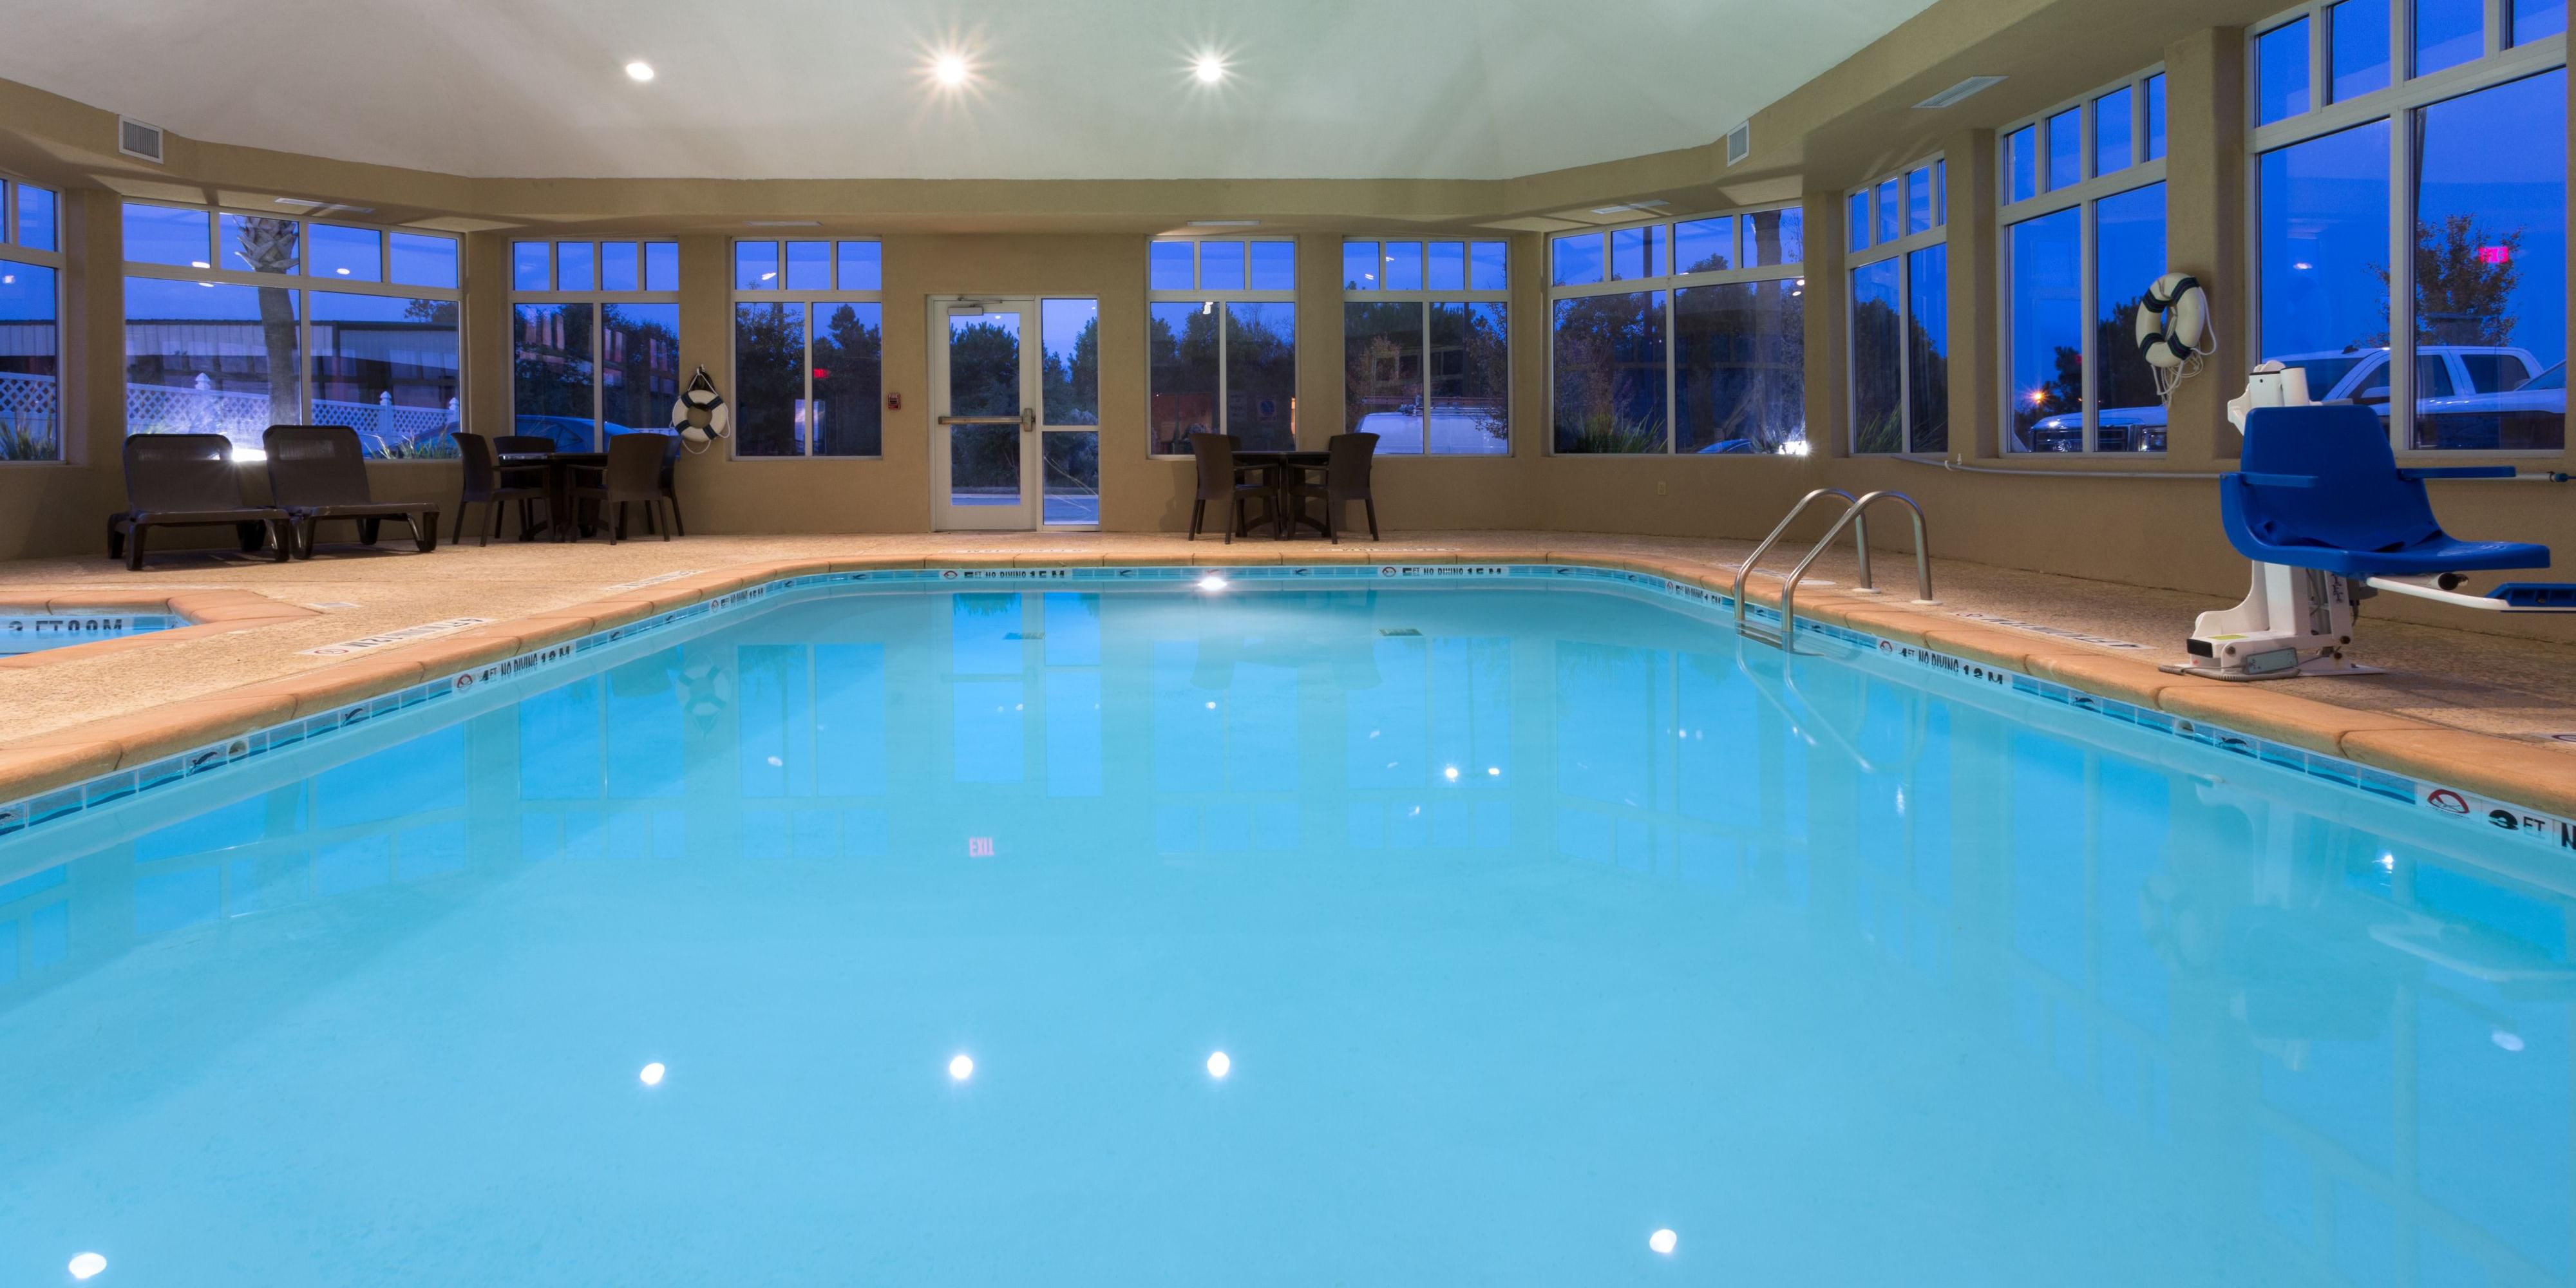 Enjoy our beautiful indoor heated pool and hot tub all year long.  Or take a steam in our Sauna. Whether you are here on business or leisure, you can unwind and take a swim. 